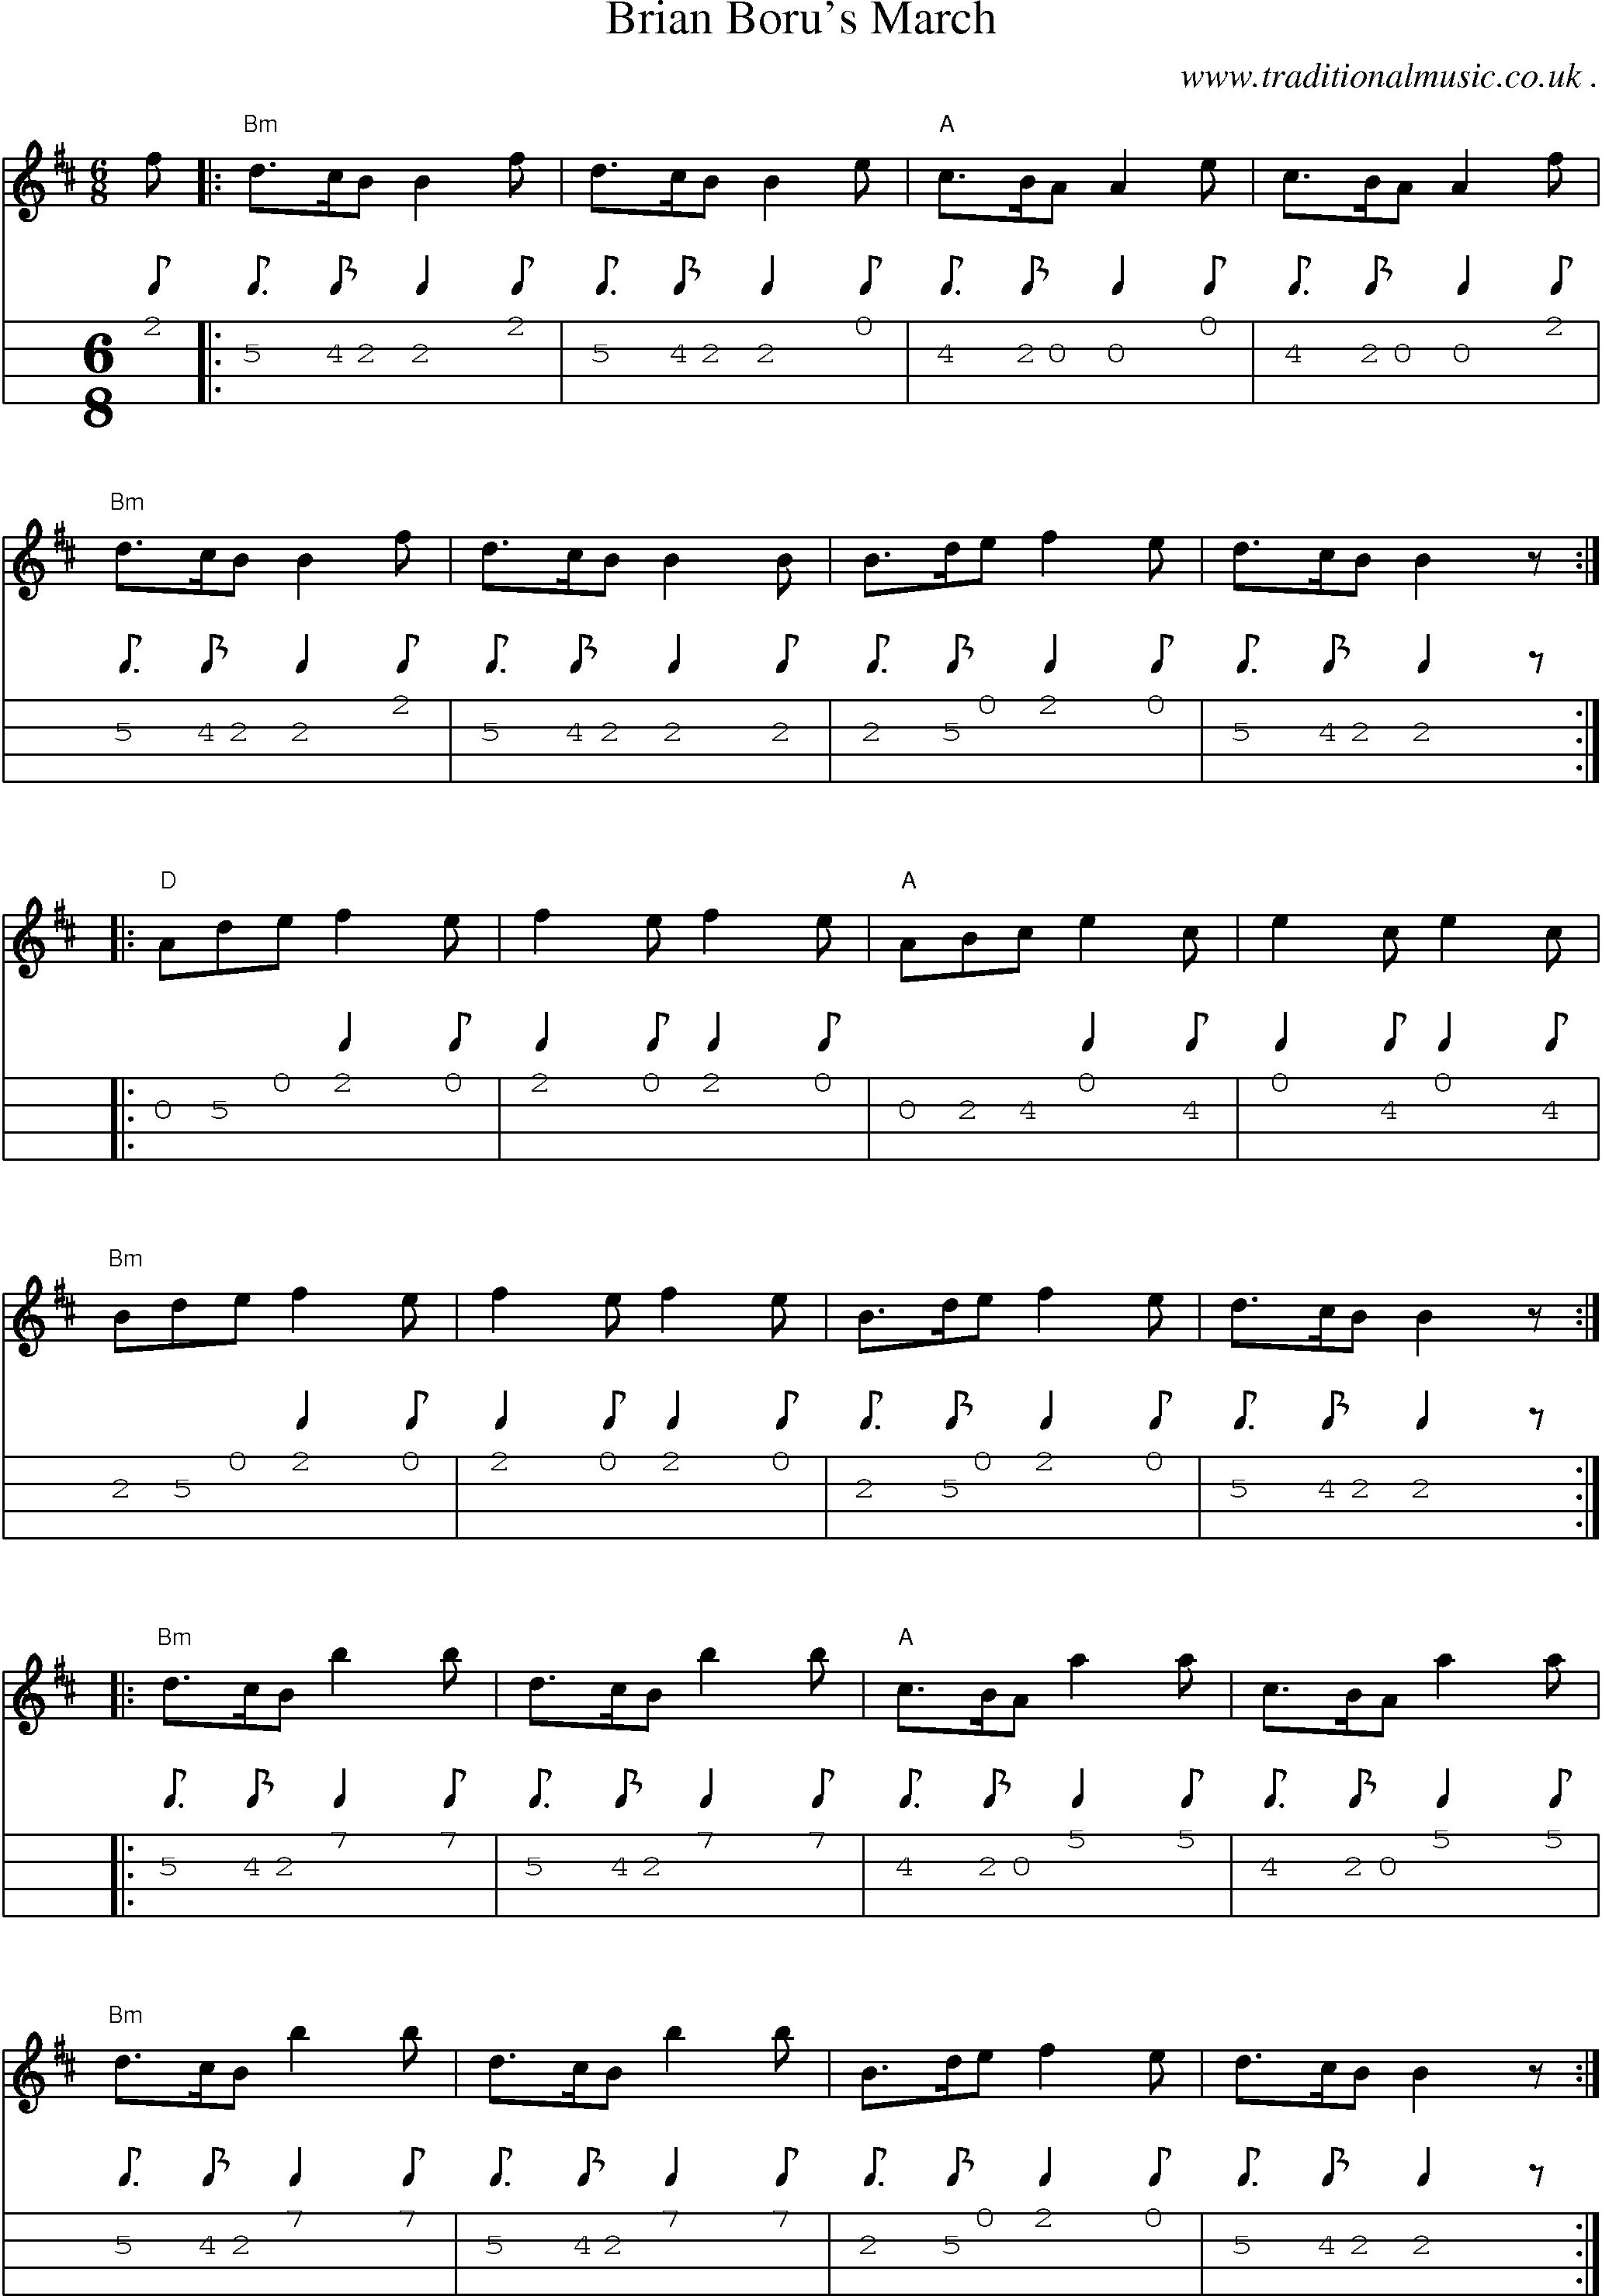 Music Score and Guitar Tabs for Brian Borus March